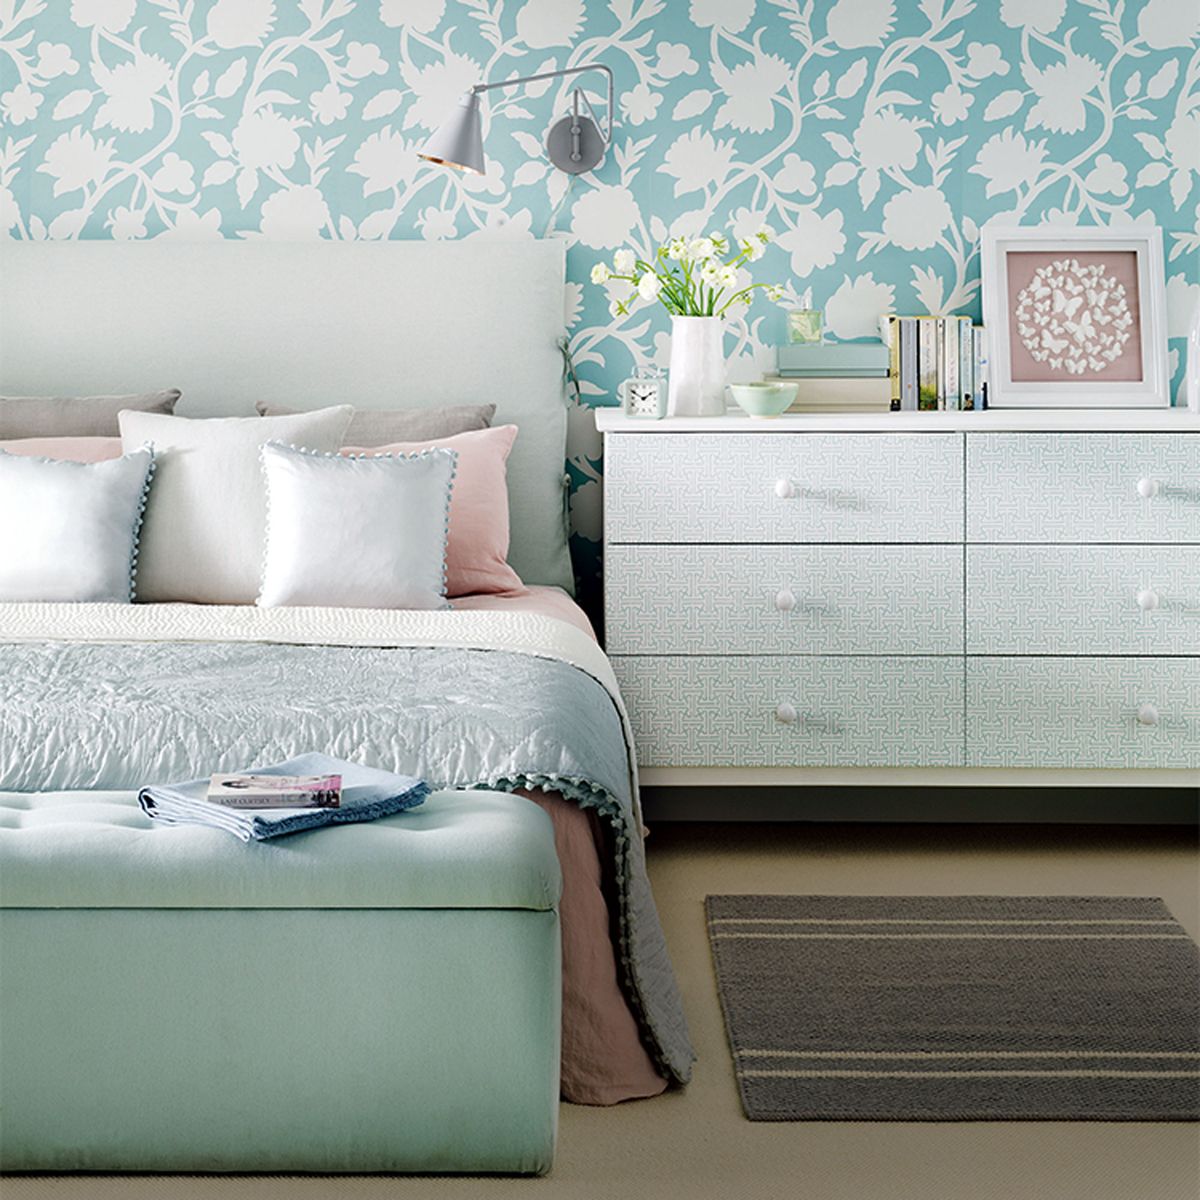 Budget bedroom ideas that are smart and oh-so simple